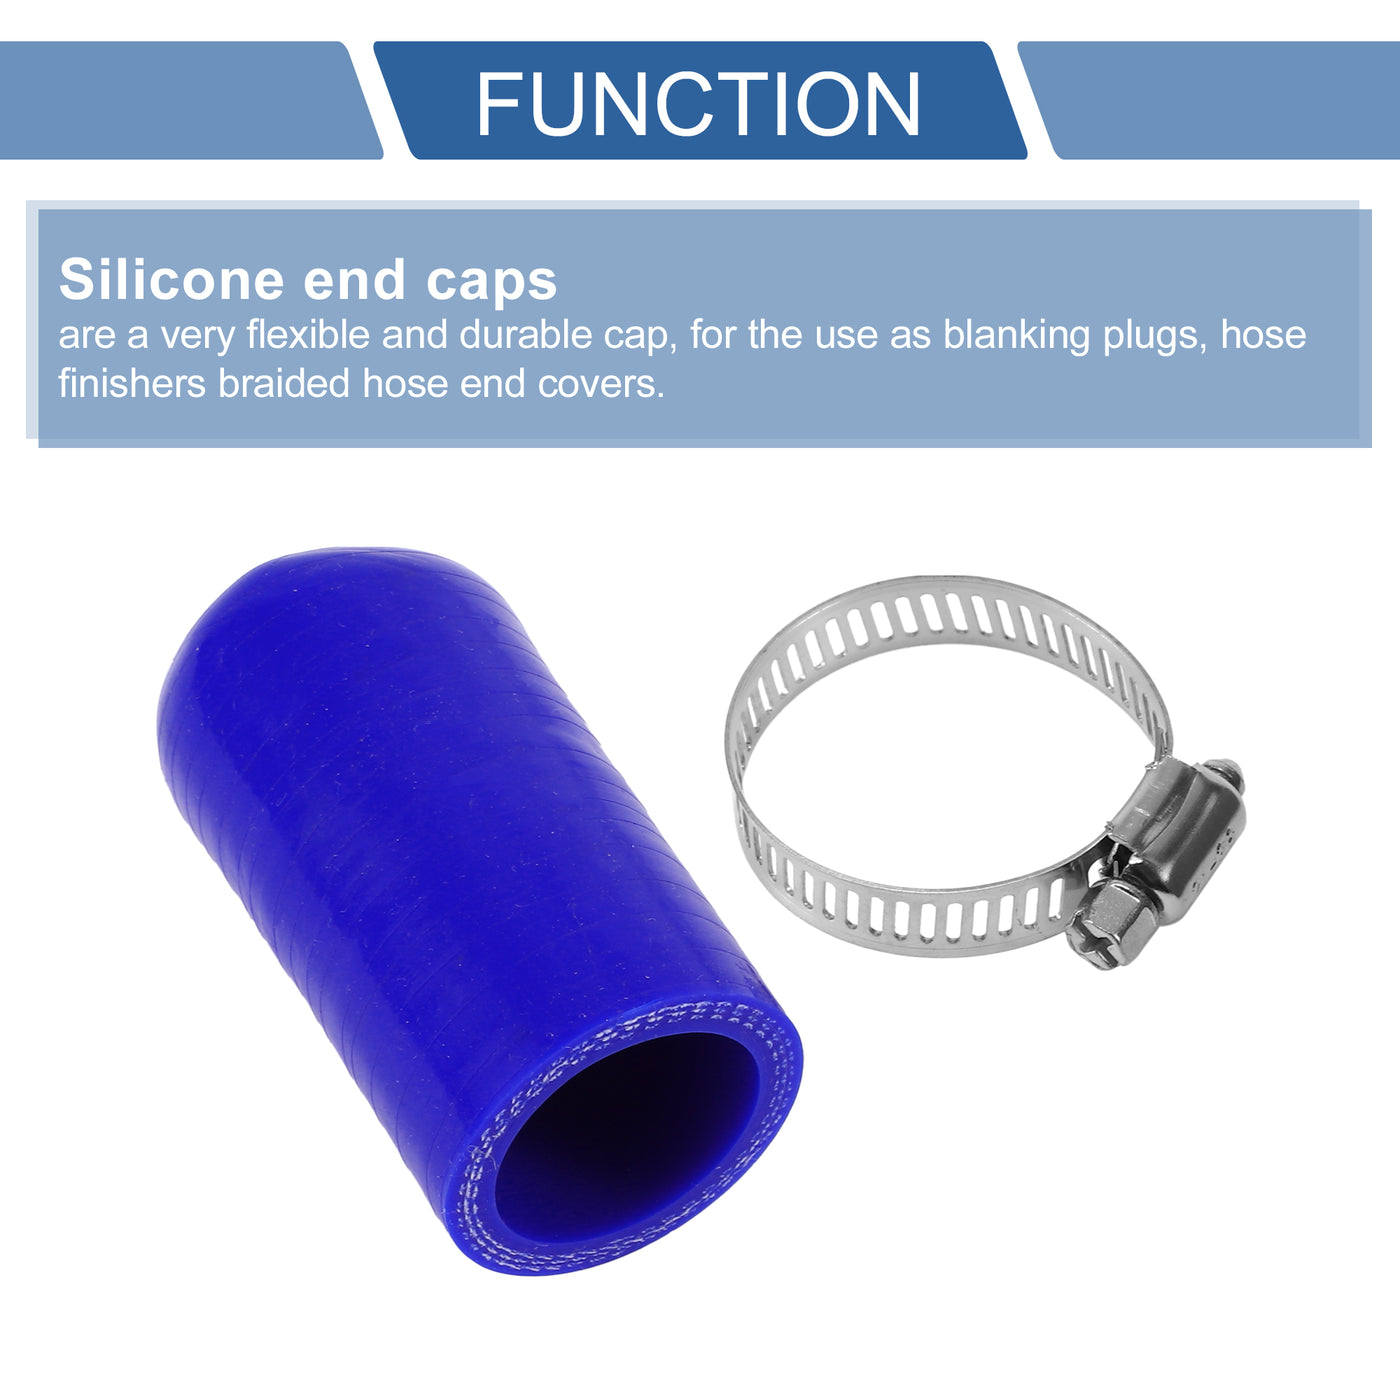 X AUTOHAUX 1 Pcs 60mm Length 28mm/1.10" ID Blue Car Silicone Rubber Hose End Cap with Clamp Silicone Reinforced Blanking Cap for Bypass Tube Universal